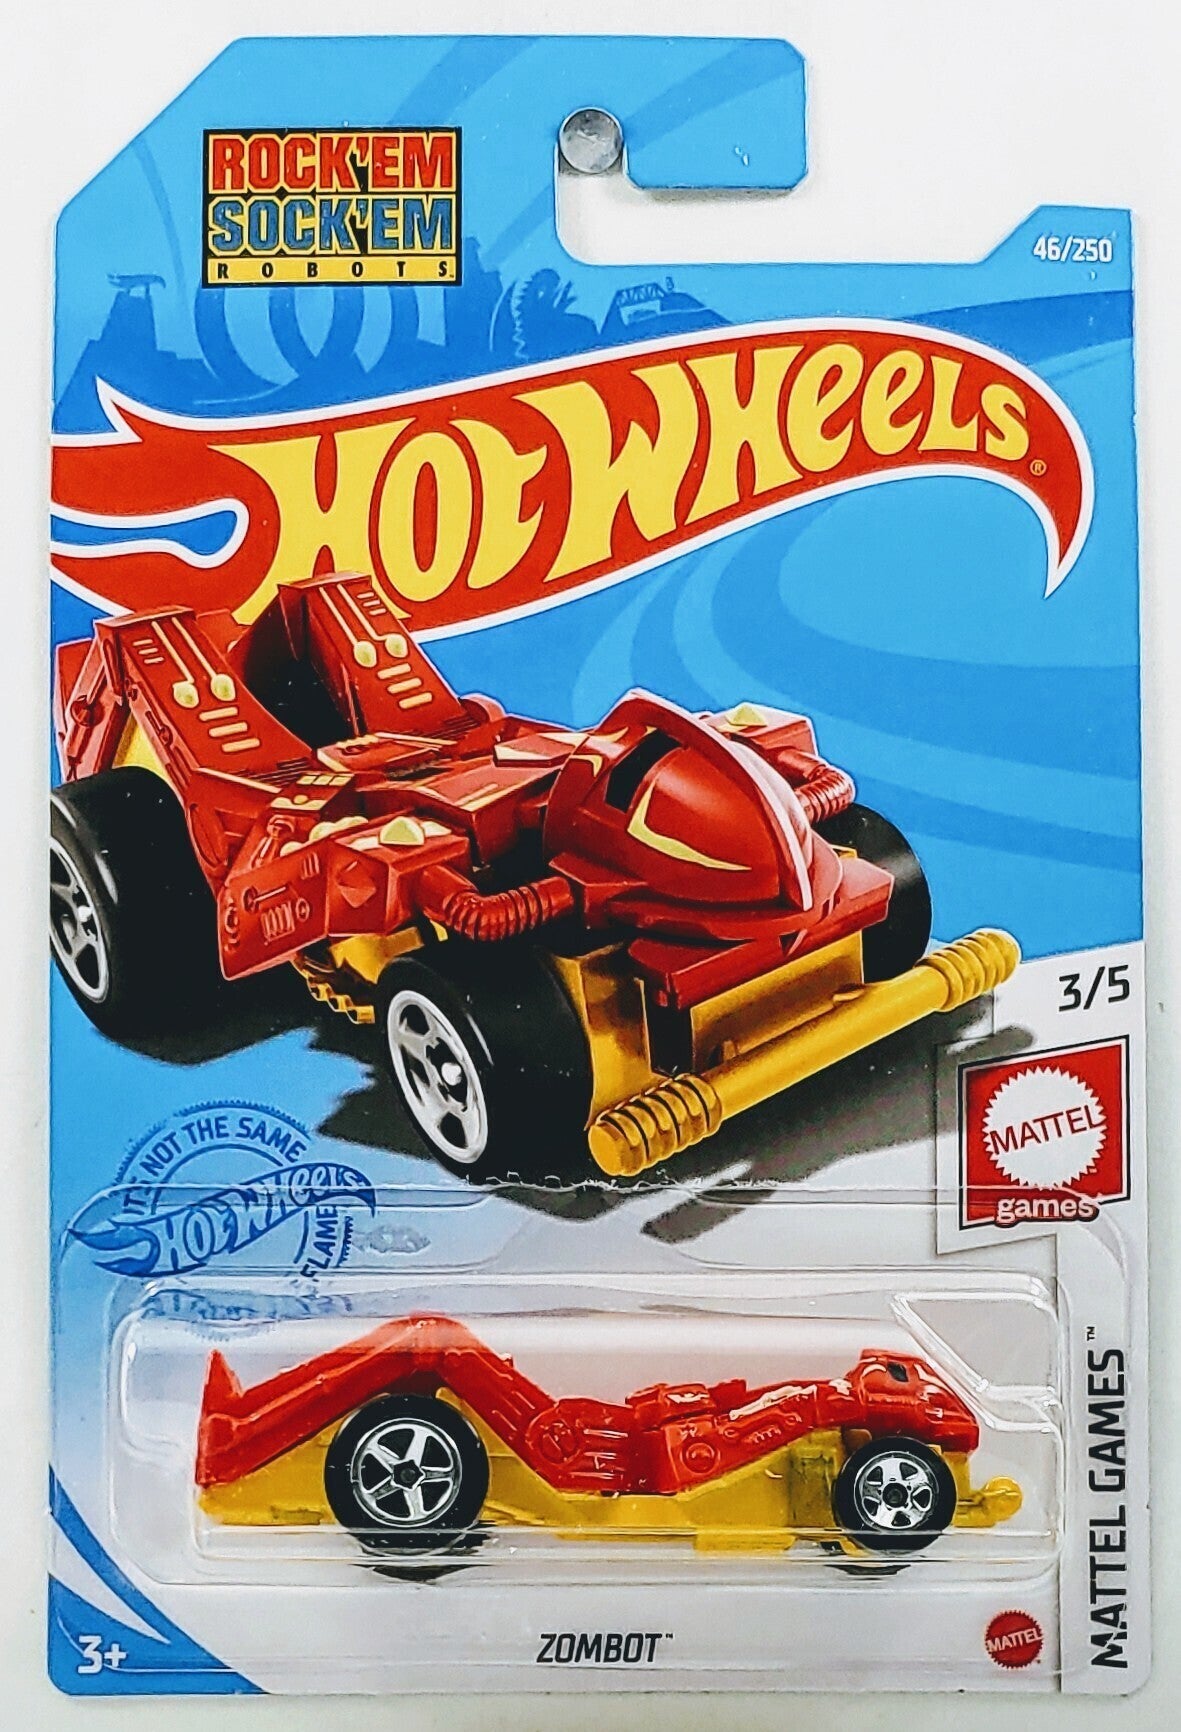 Hot Wheels 2021 - Collector # 046/250 - Mattel Games 3/5 - Zombot - Red - IC